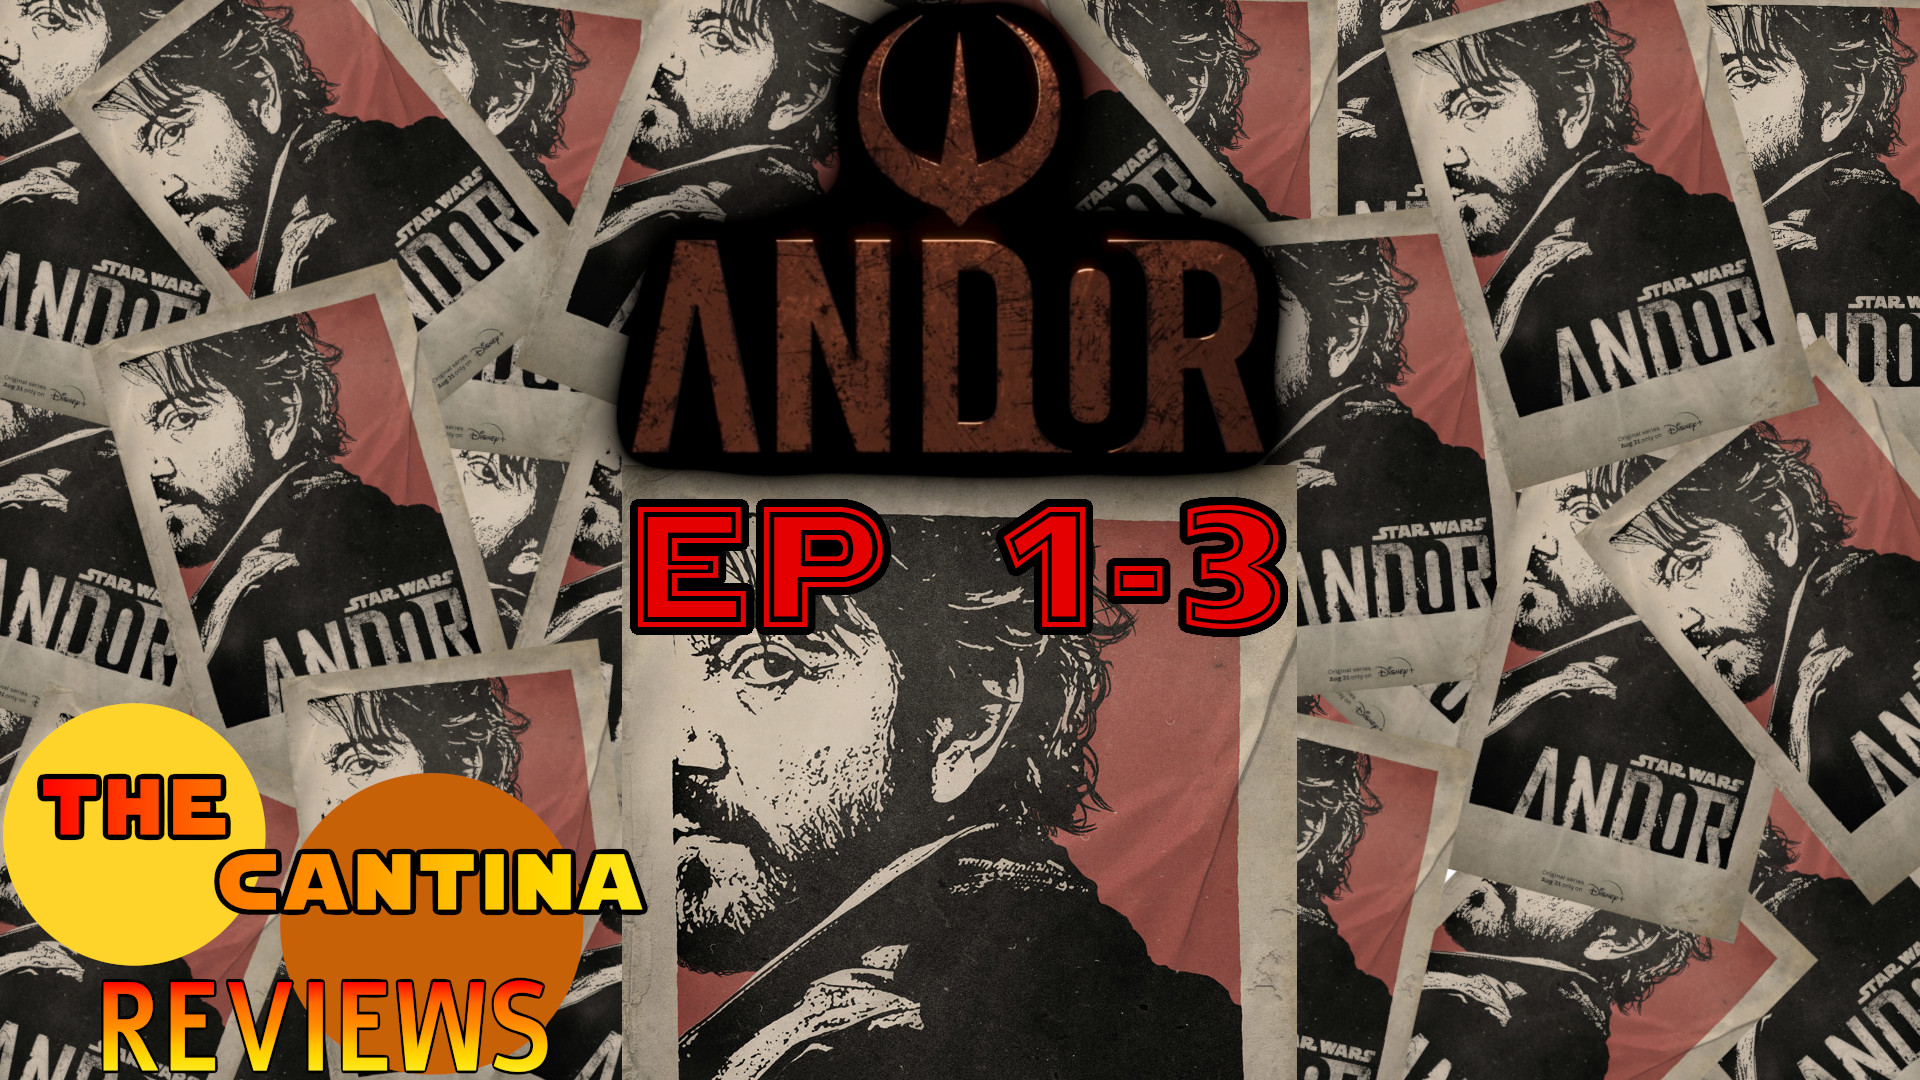 A thumbnail for Disney Plus Series Andor Episode 1-3 Review. It features pictures of the title character in the form of "wanted" posters. The series title and podcast Logo are seen as well as episode numbers.